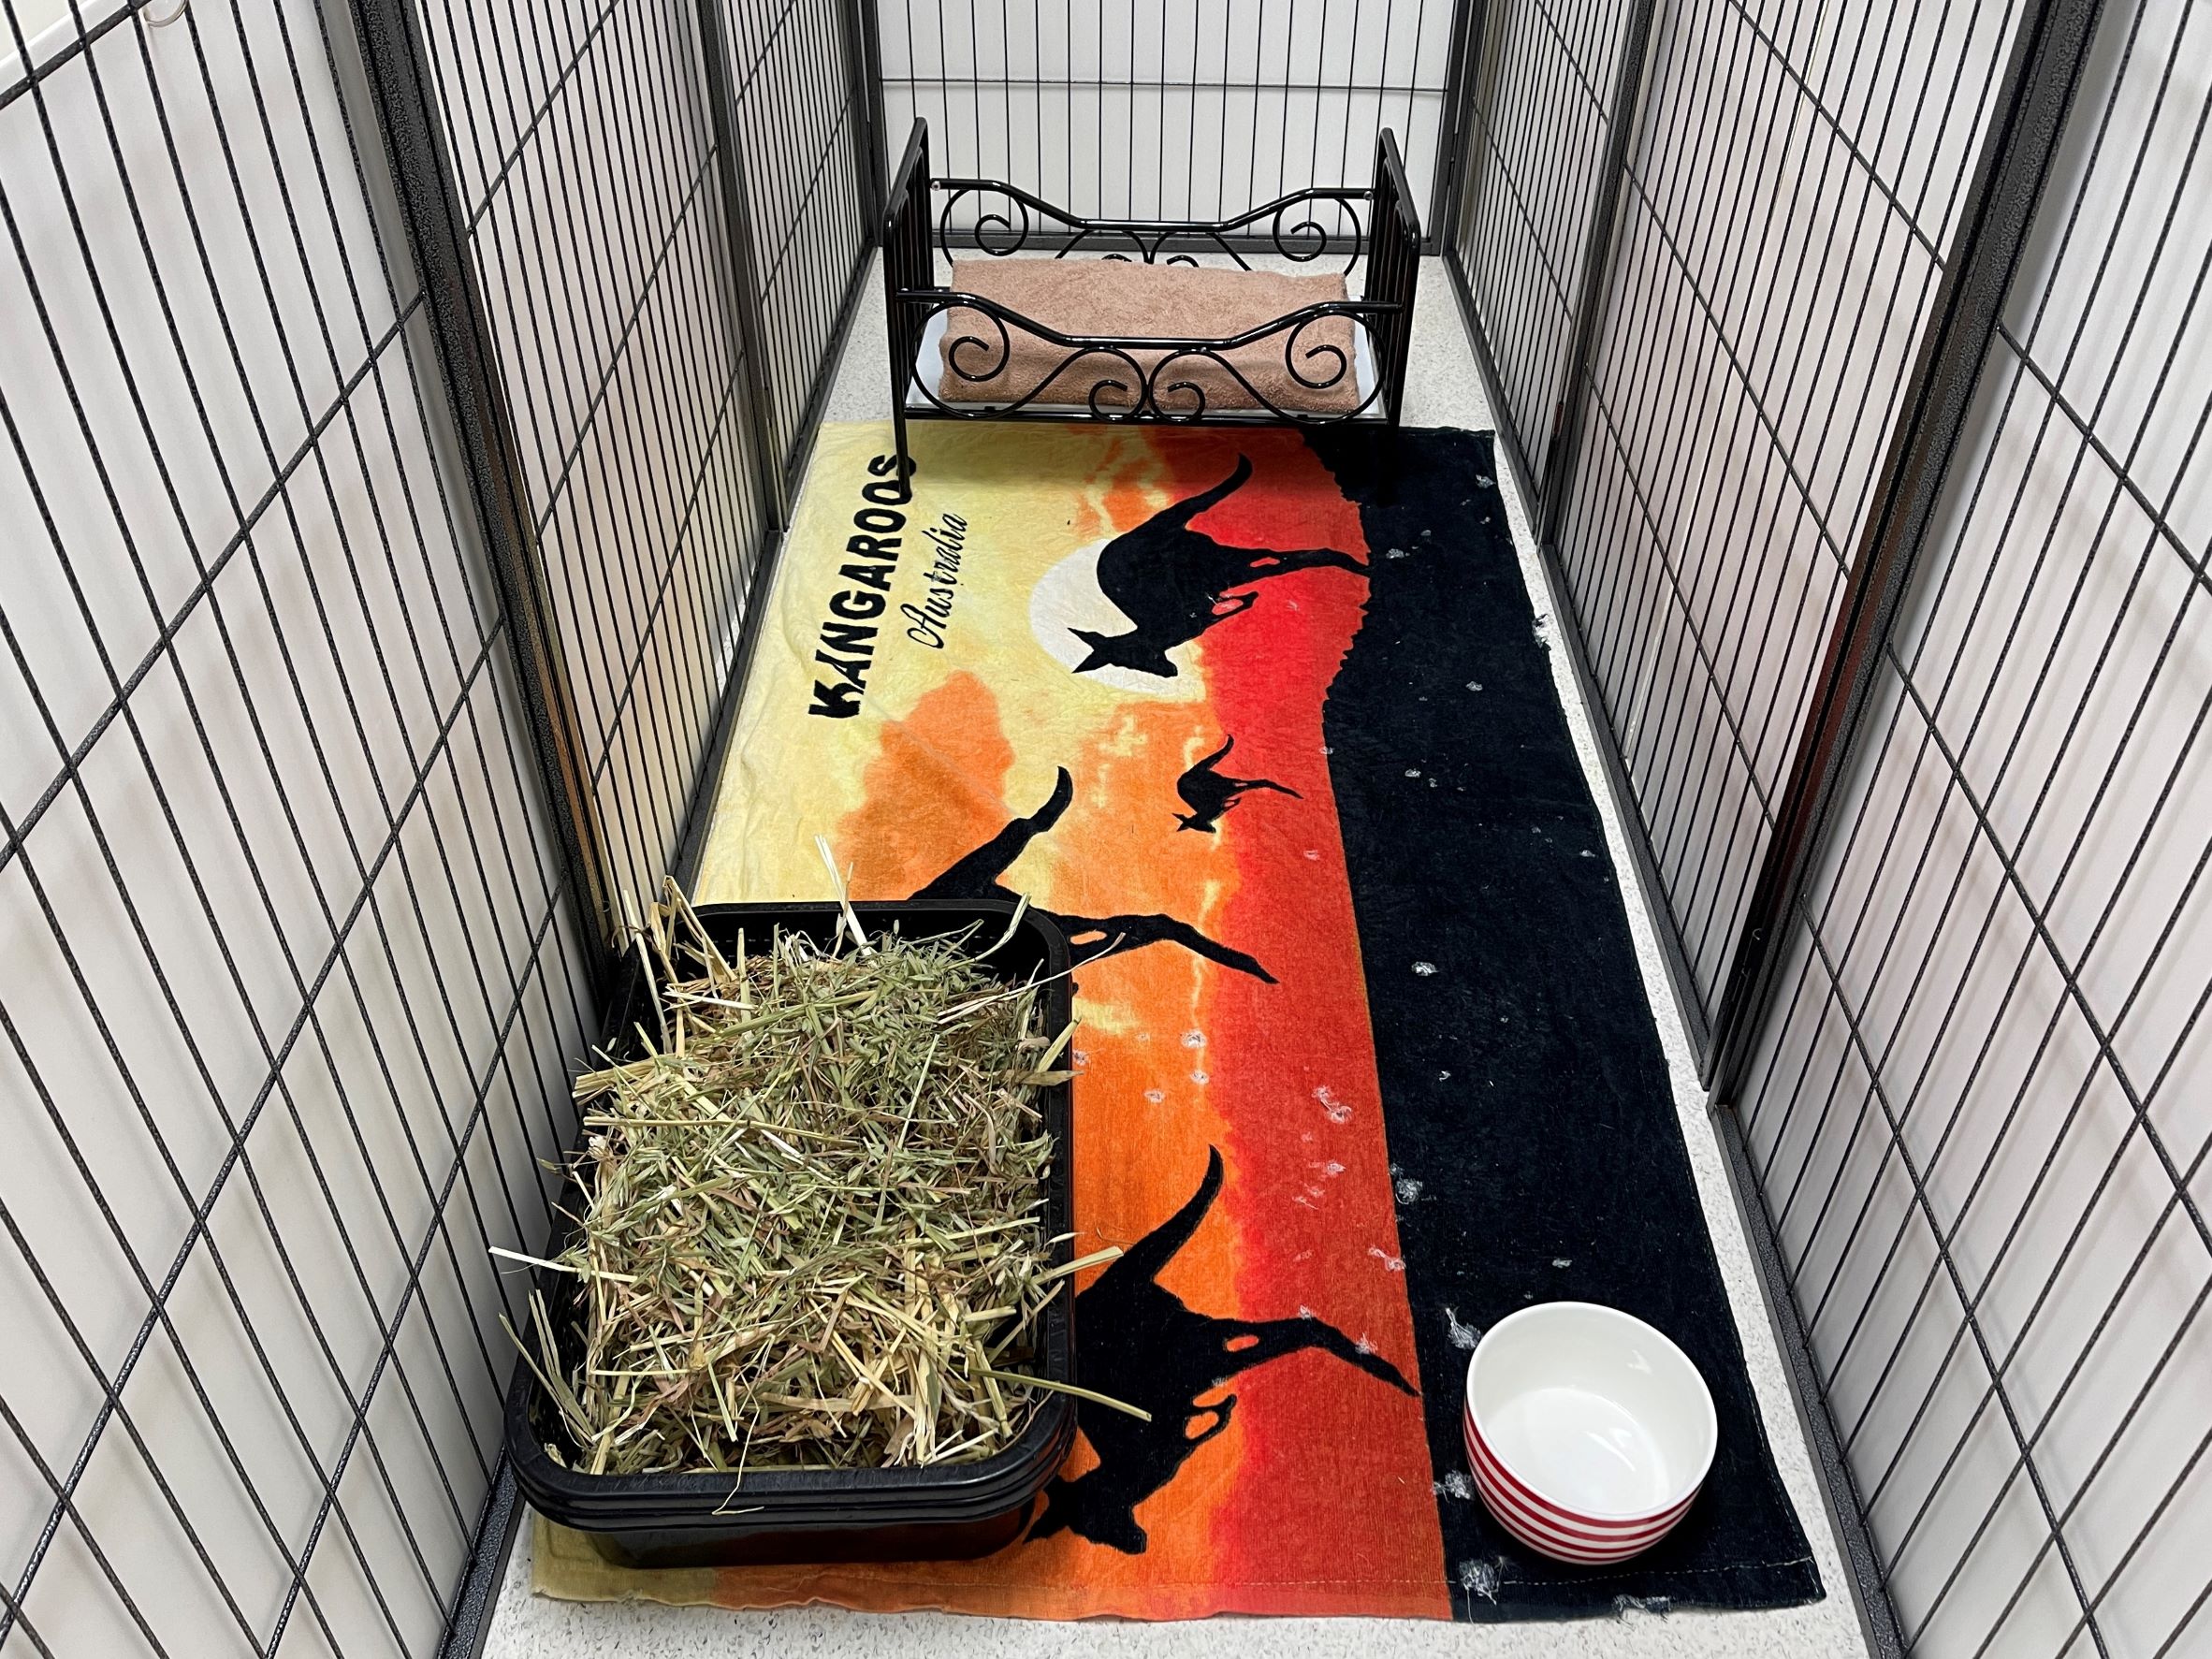 Comfy bunny play pen accommodation at our rabbit boarding hotel in Melbourne